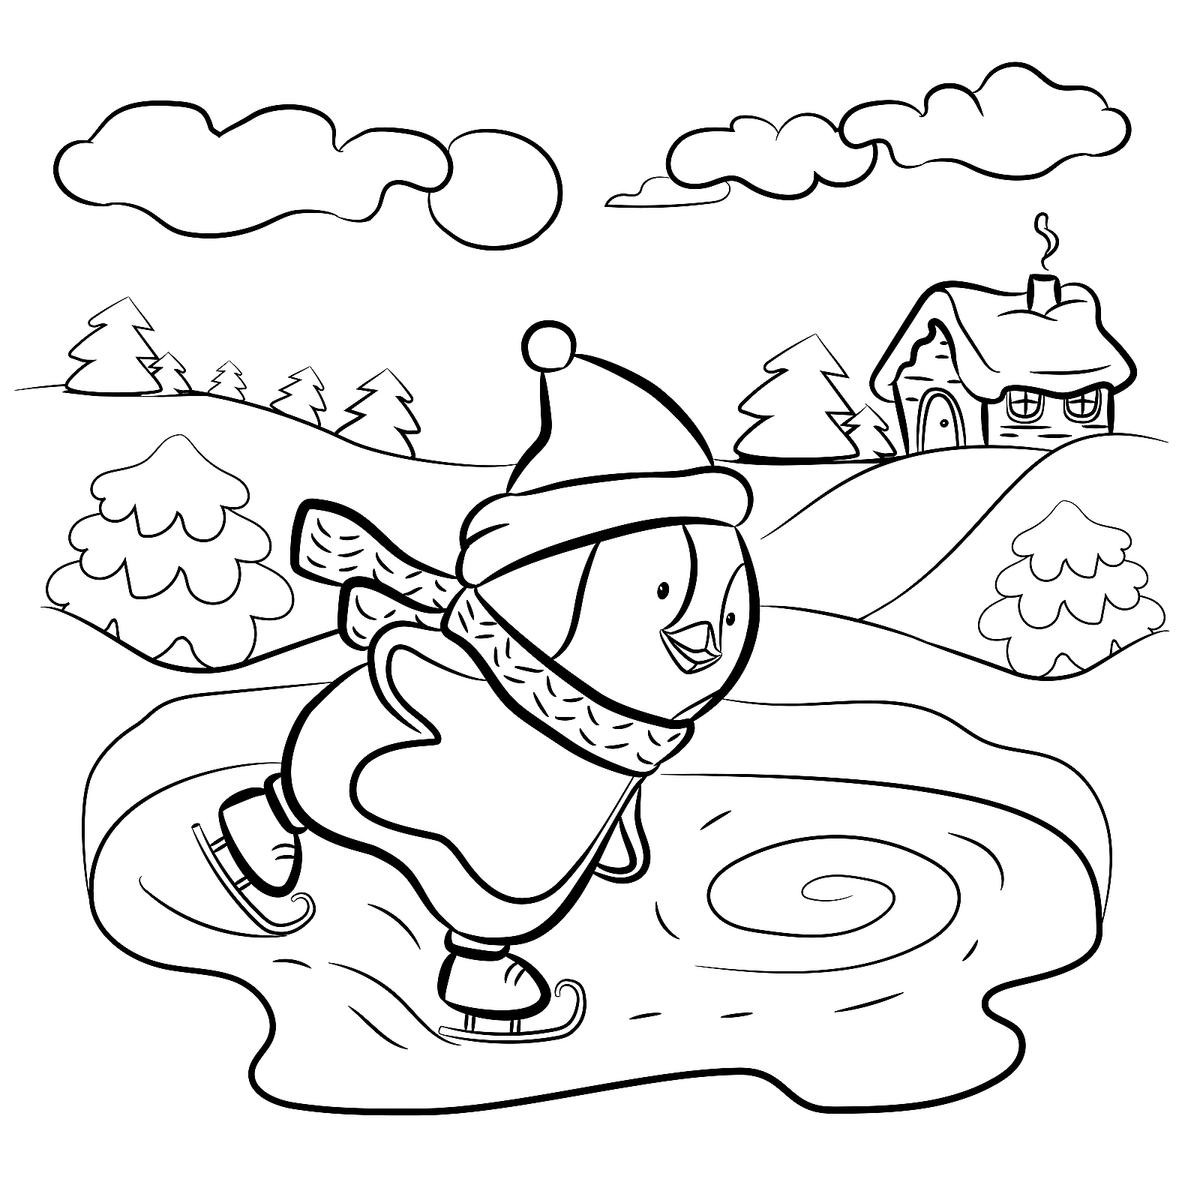 Winter Coloring Pages For Toddlers
 Winter Puzzle & Coloring Pages Printable Winter Themed